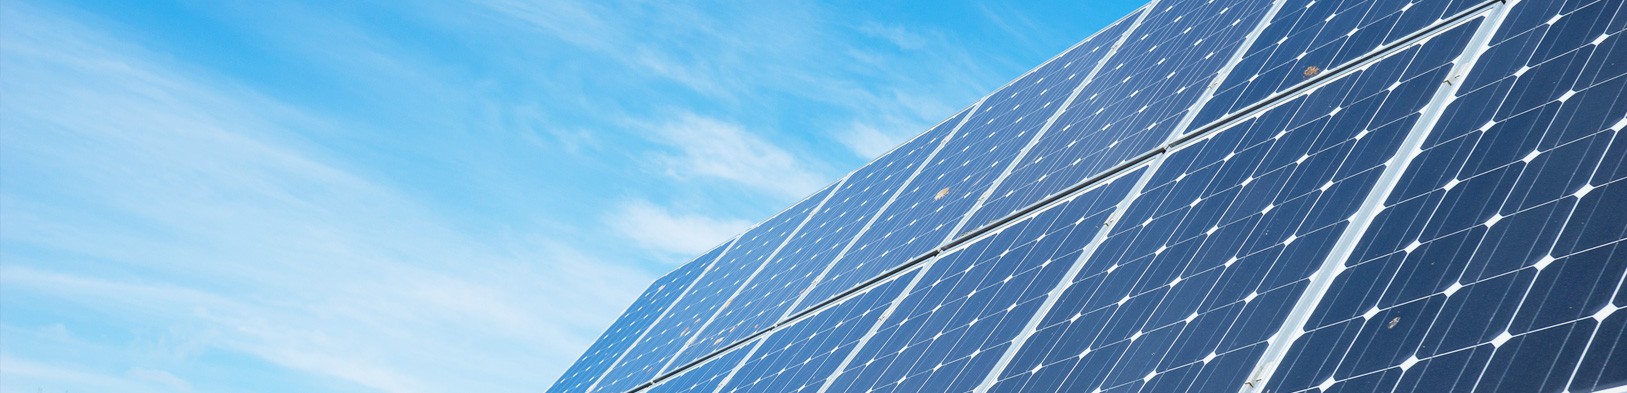 The use of solar energy as a way to reduce environmental damage